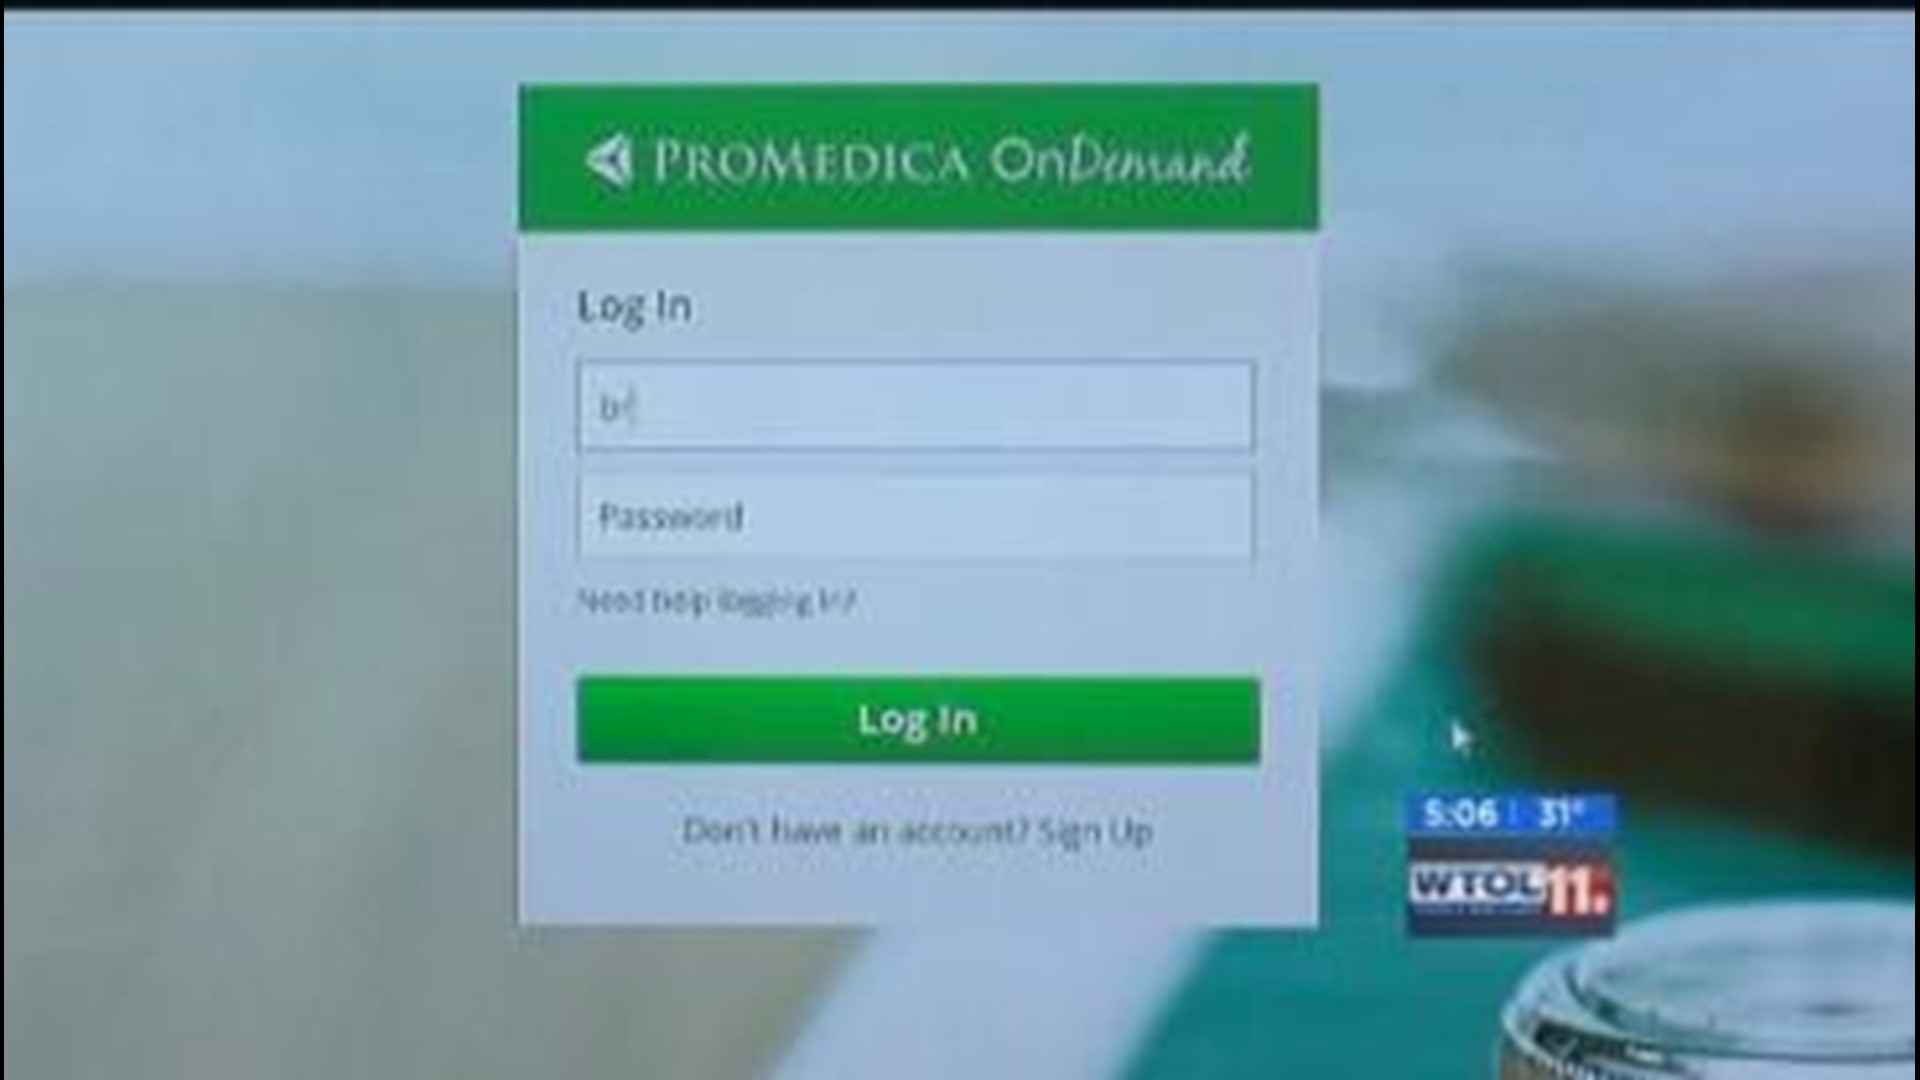 Promedica launches "On Demand" digital appointments